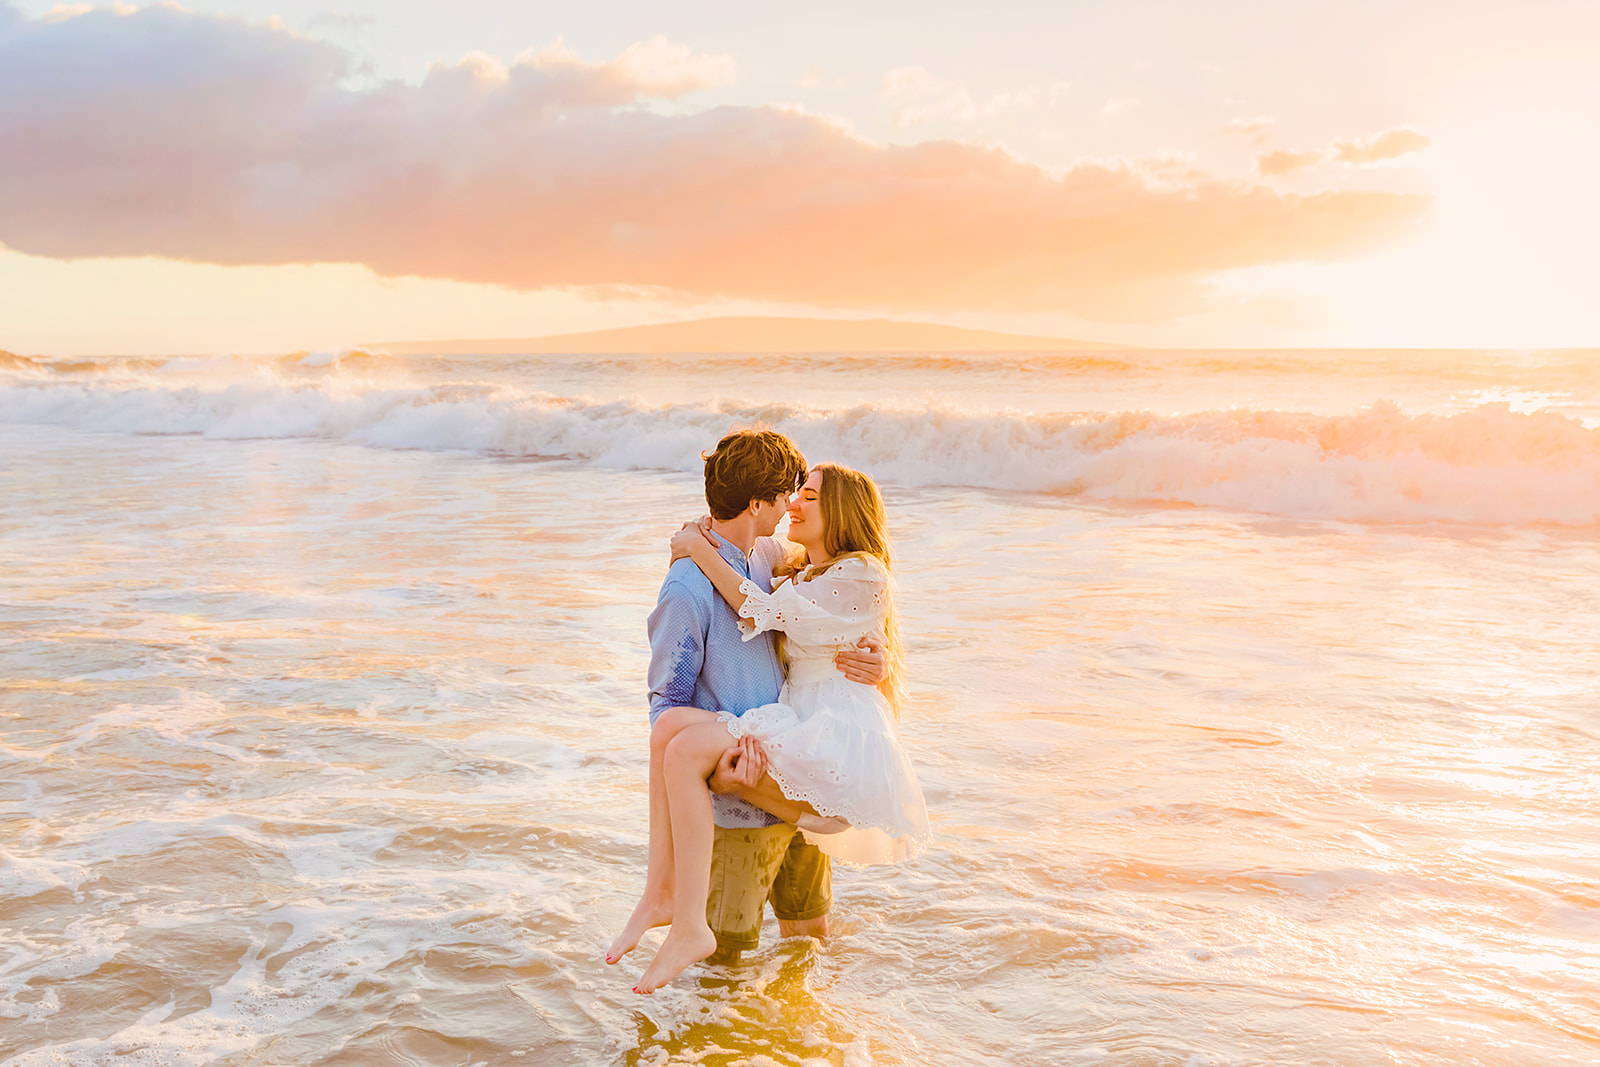 Mia Maples is carried by her fiance into the ocean during sunset beach engagement photos with Love + Water Photography in Hawaii.